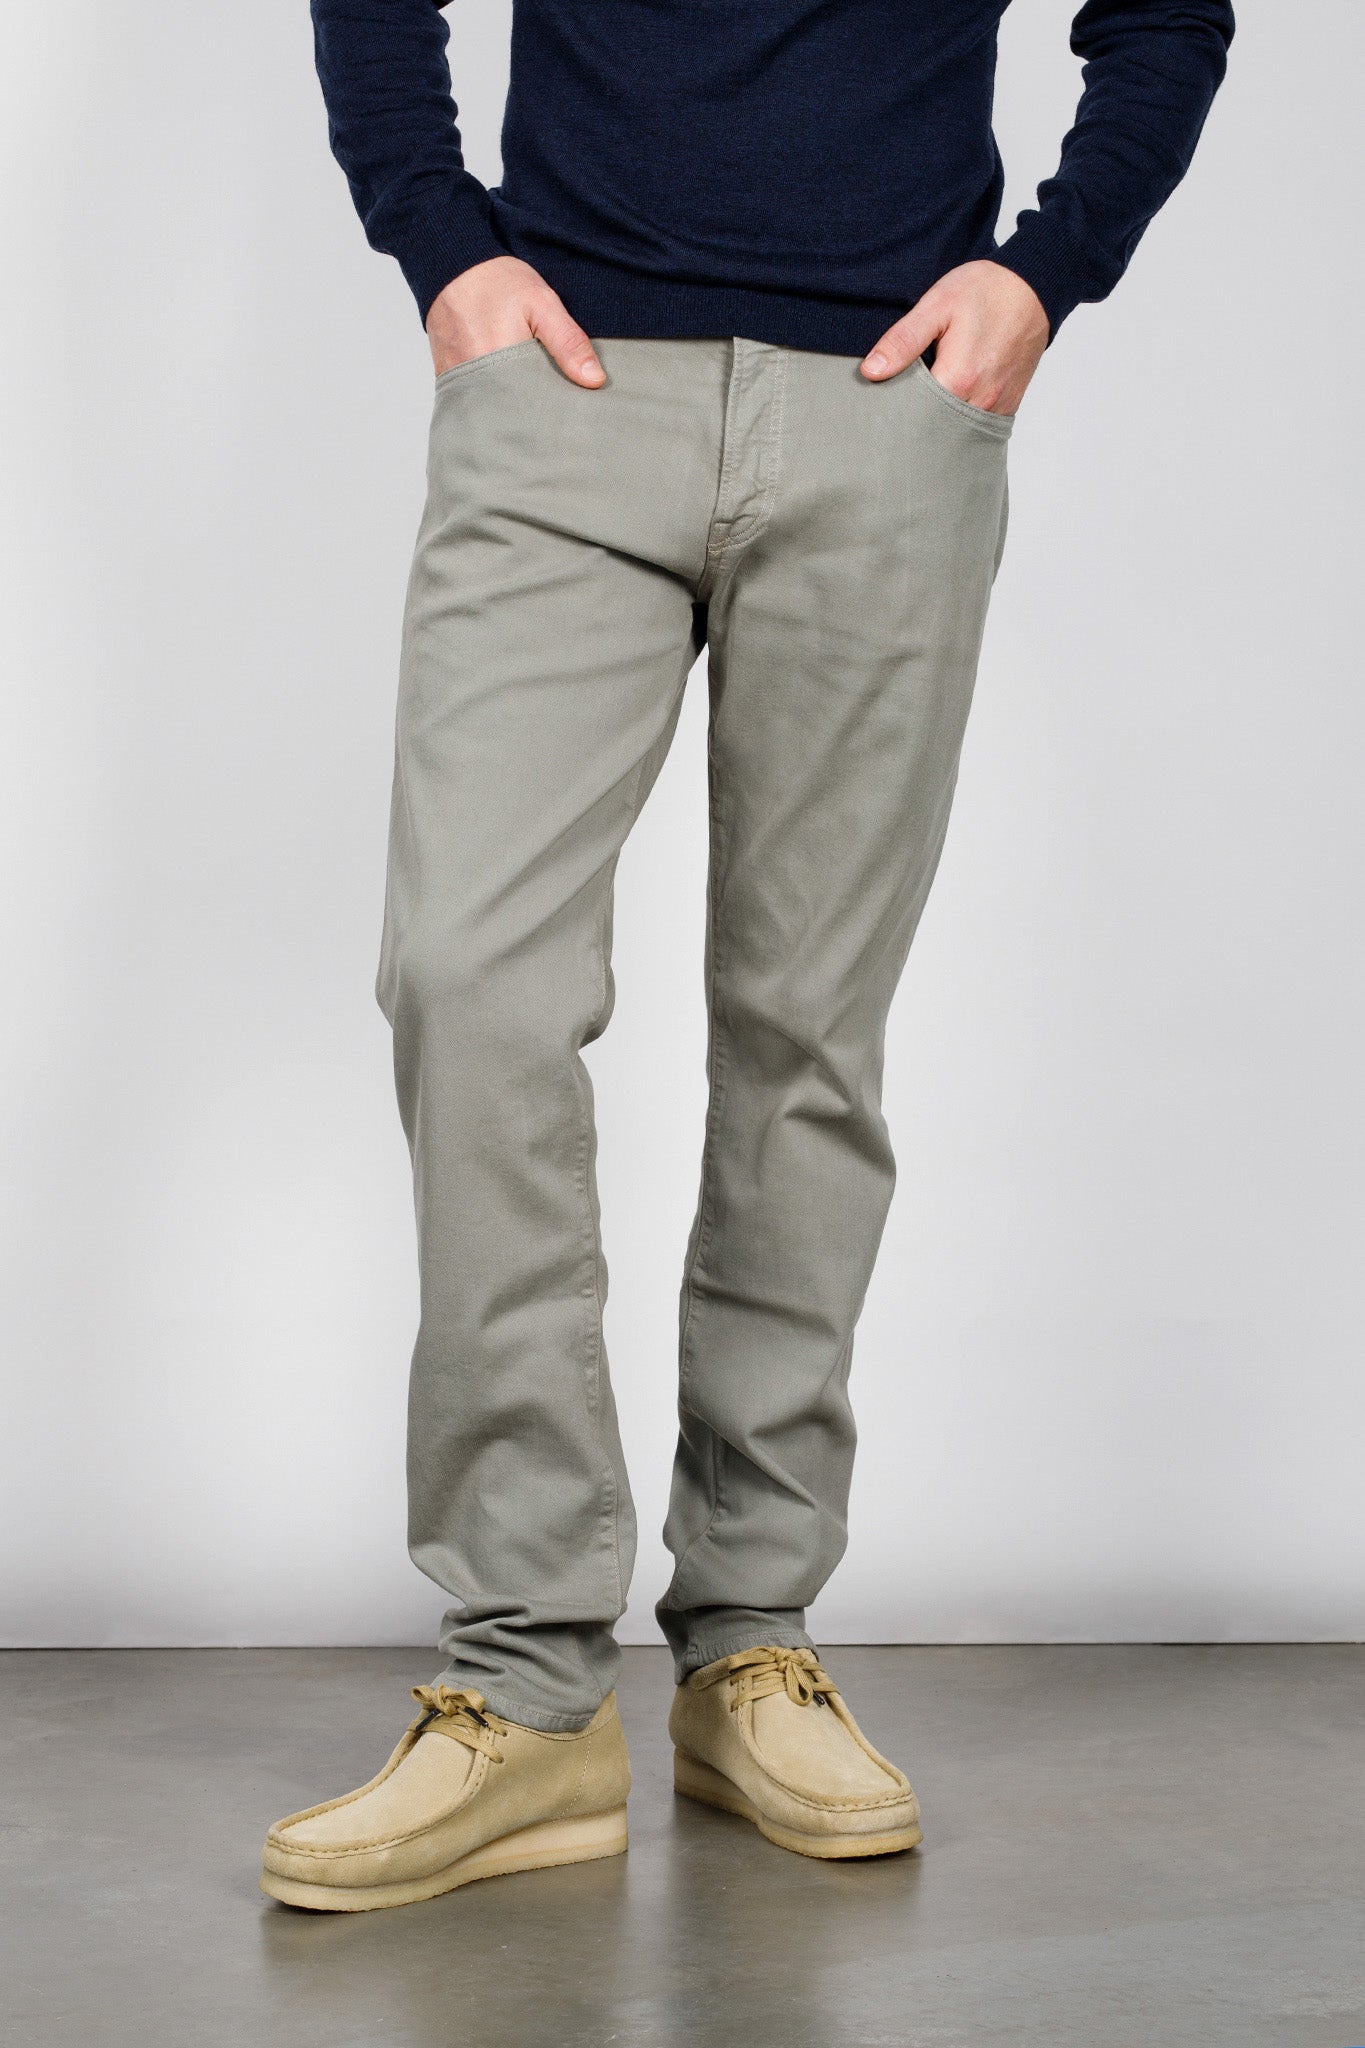 Adler Tapered Classic Pants Citizens of Humanity   